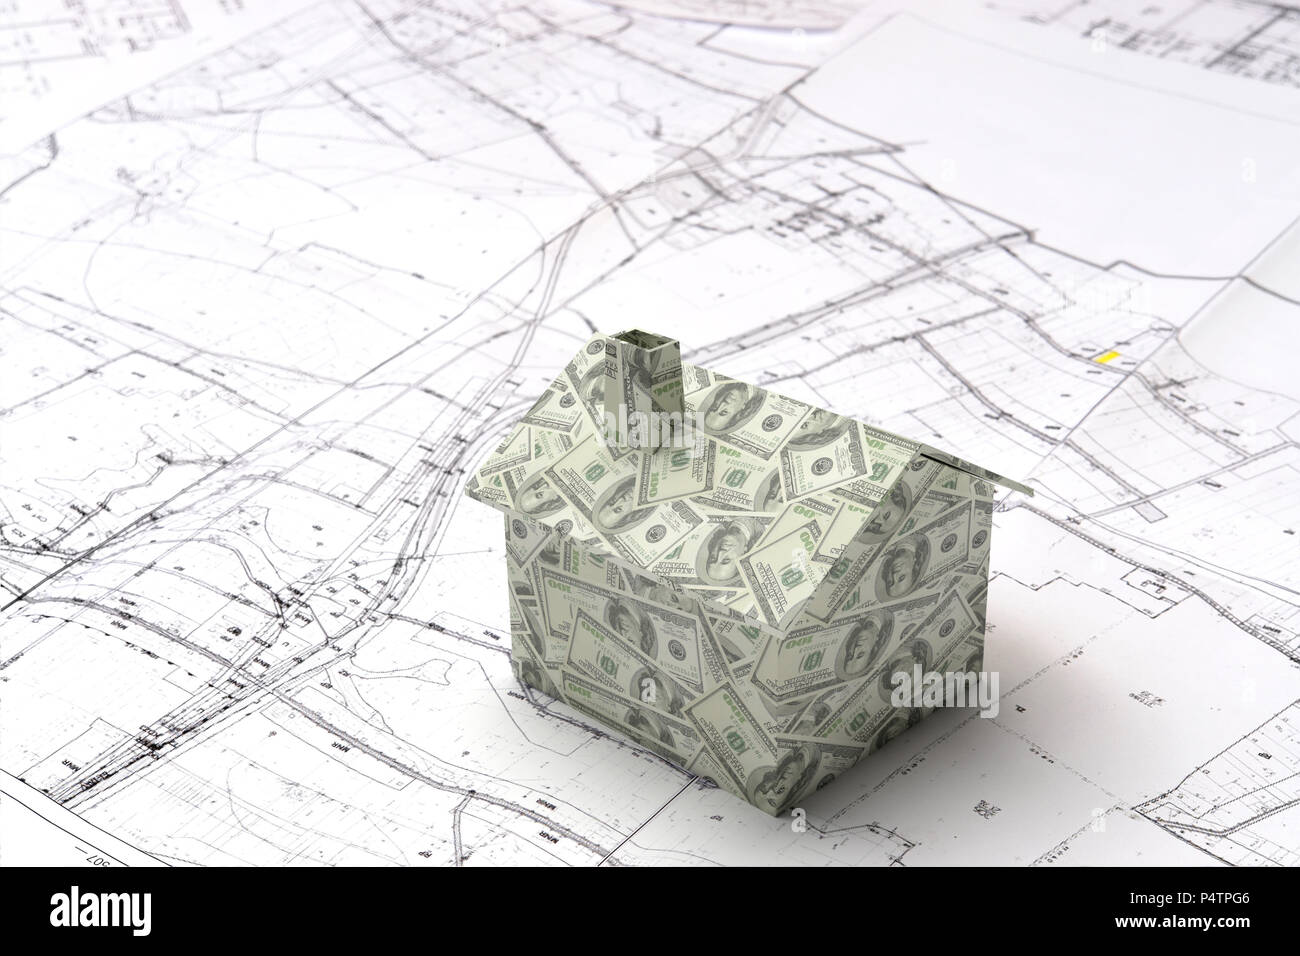 Little 3D cardboard house model wrapped around with American dollar bills on building plan Stock Photo